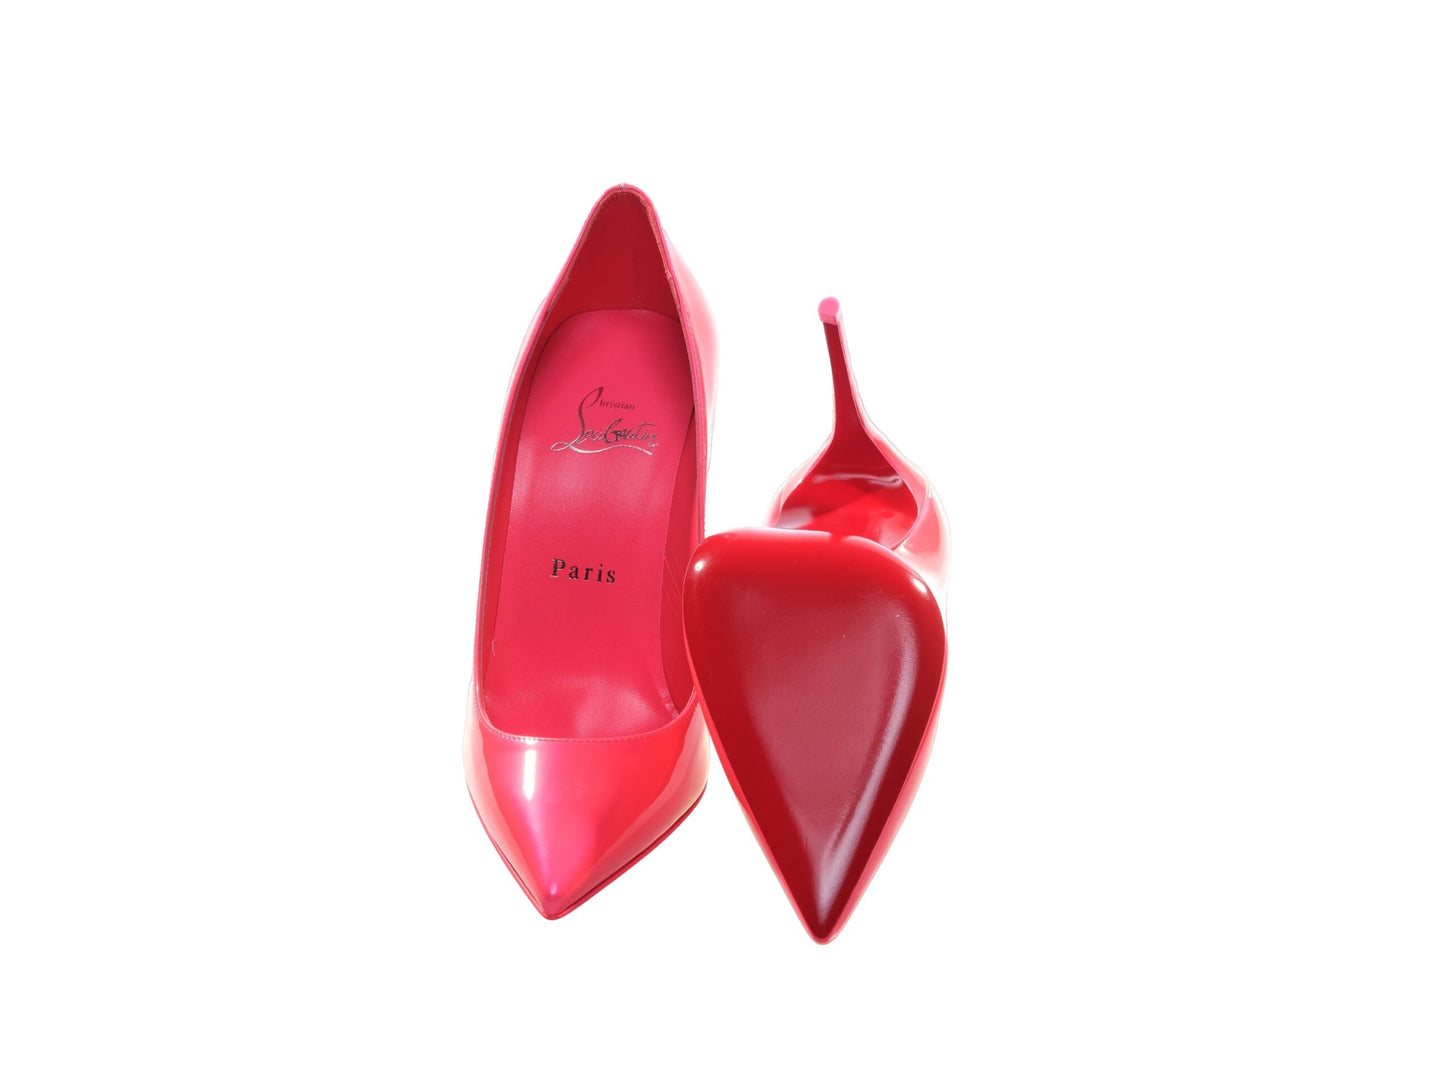 Christian Louboutin Sporty Kate Hot Pink Patent Leather High Heel Pumps